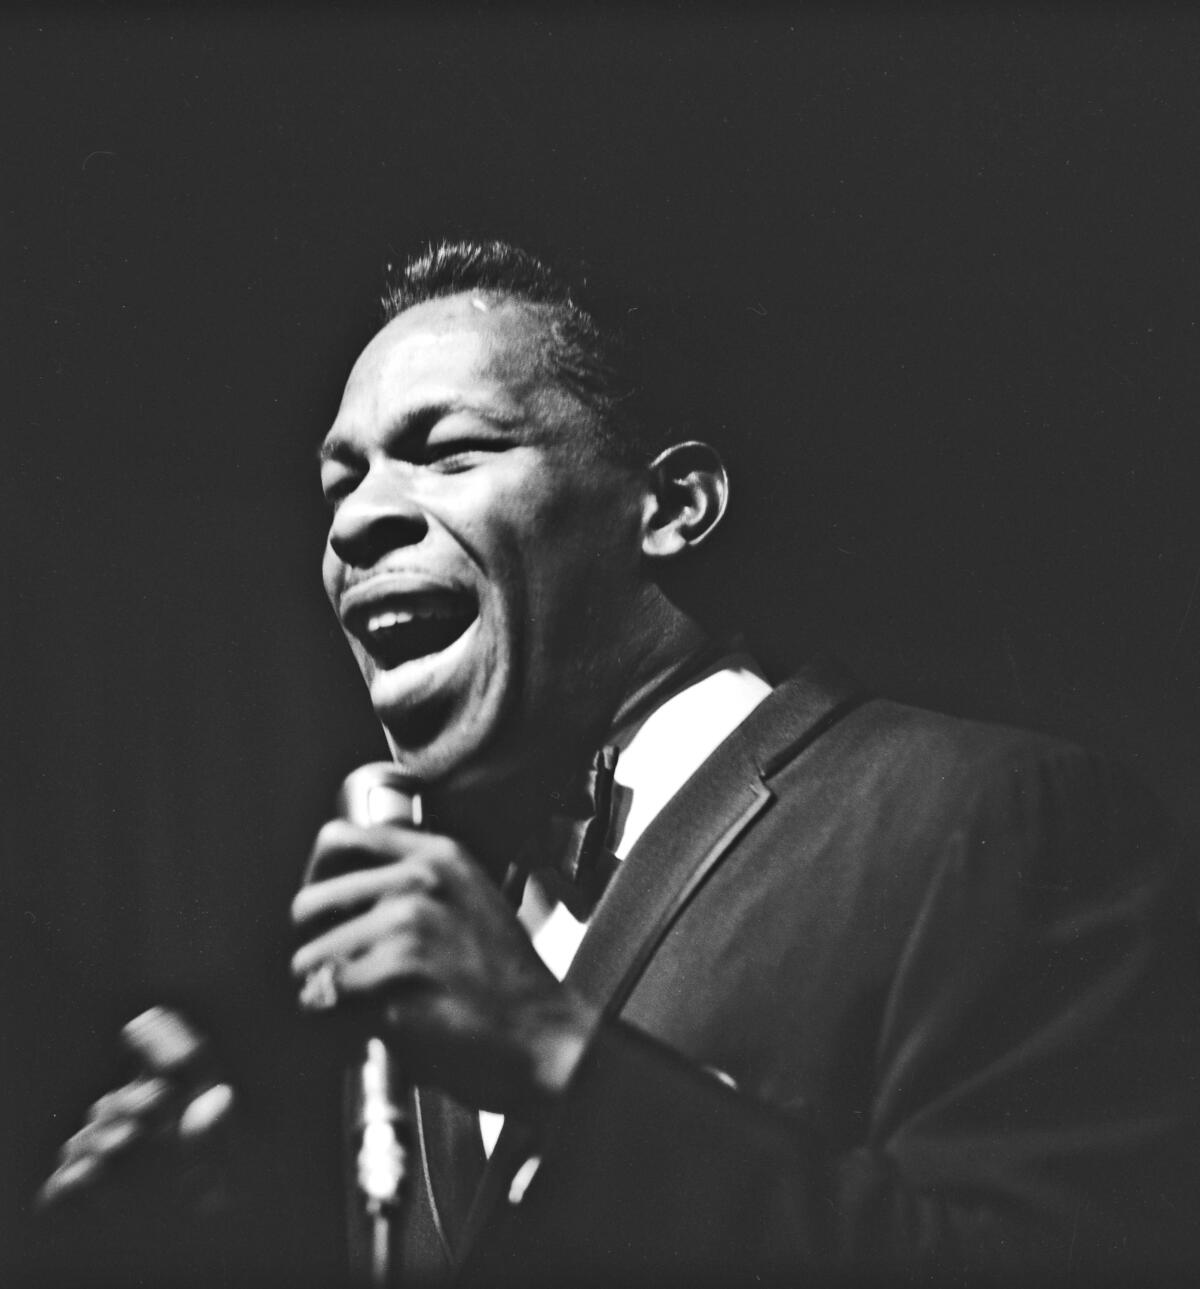 Wearing a suit and tie, Lloyd Price sings into a microphone.